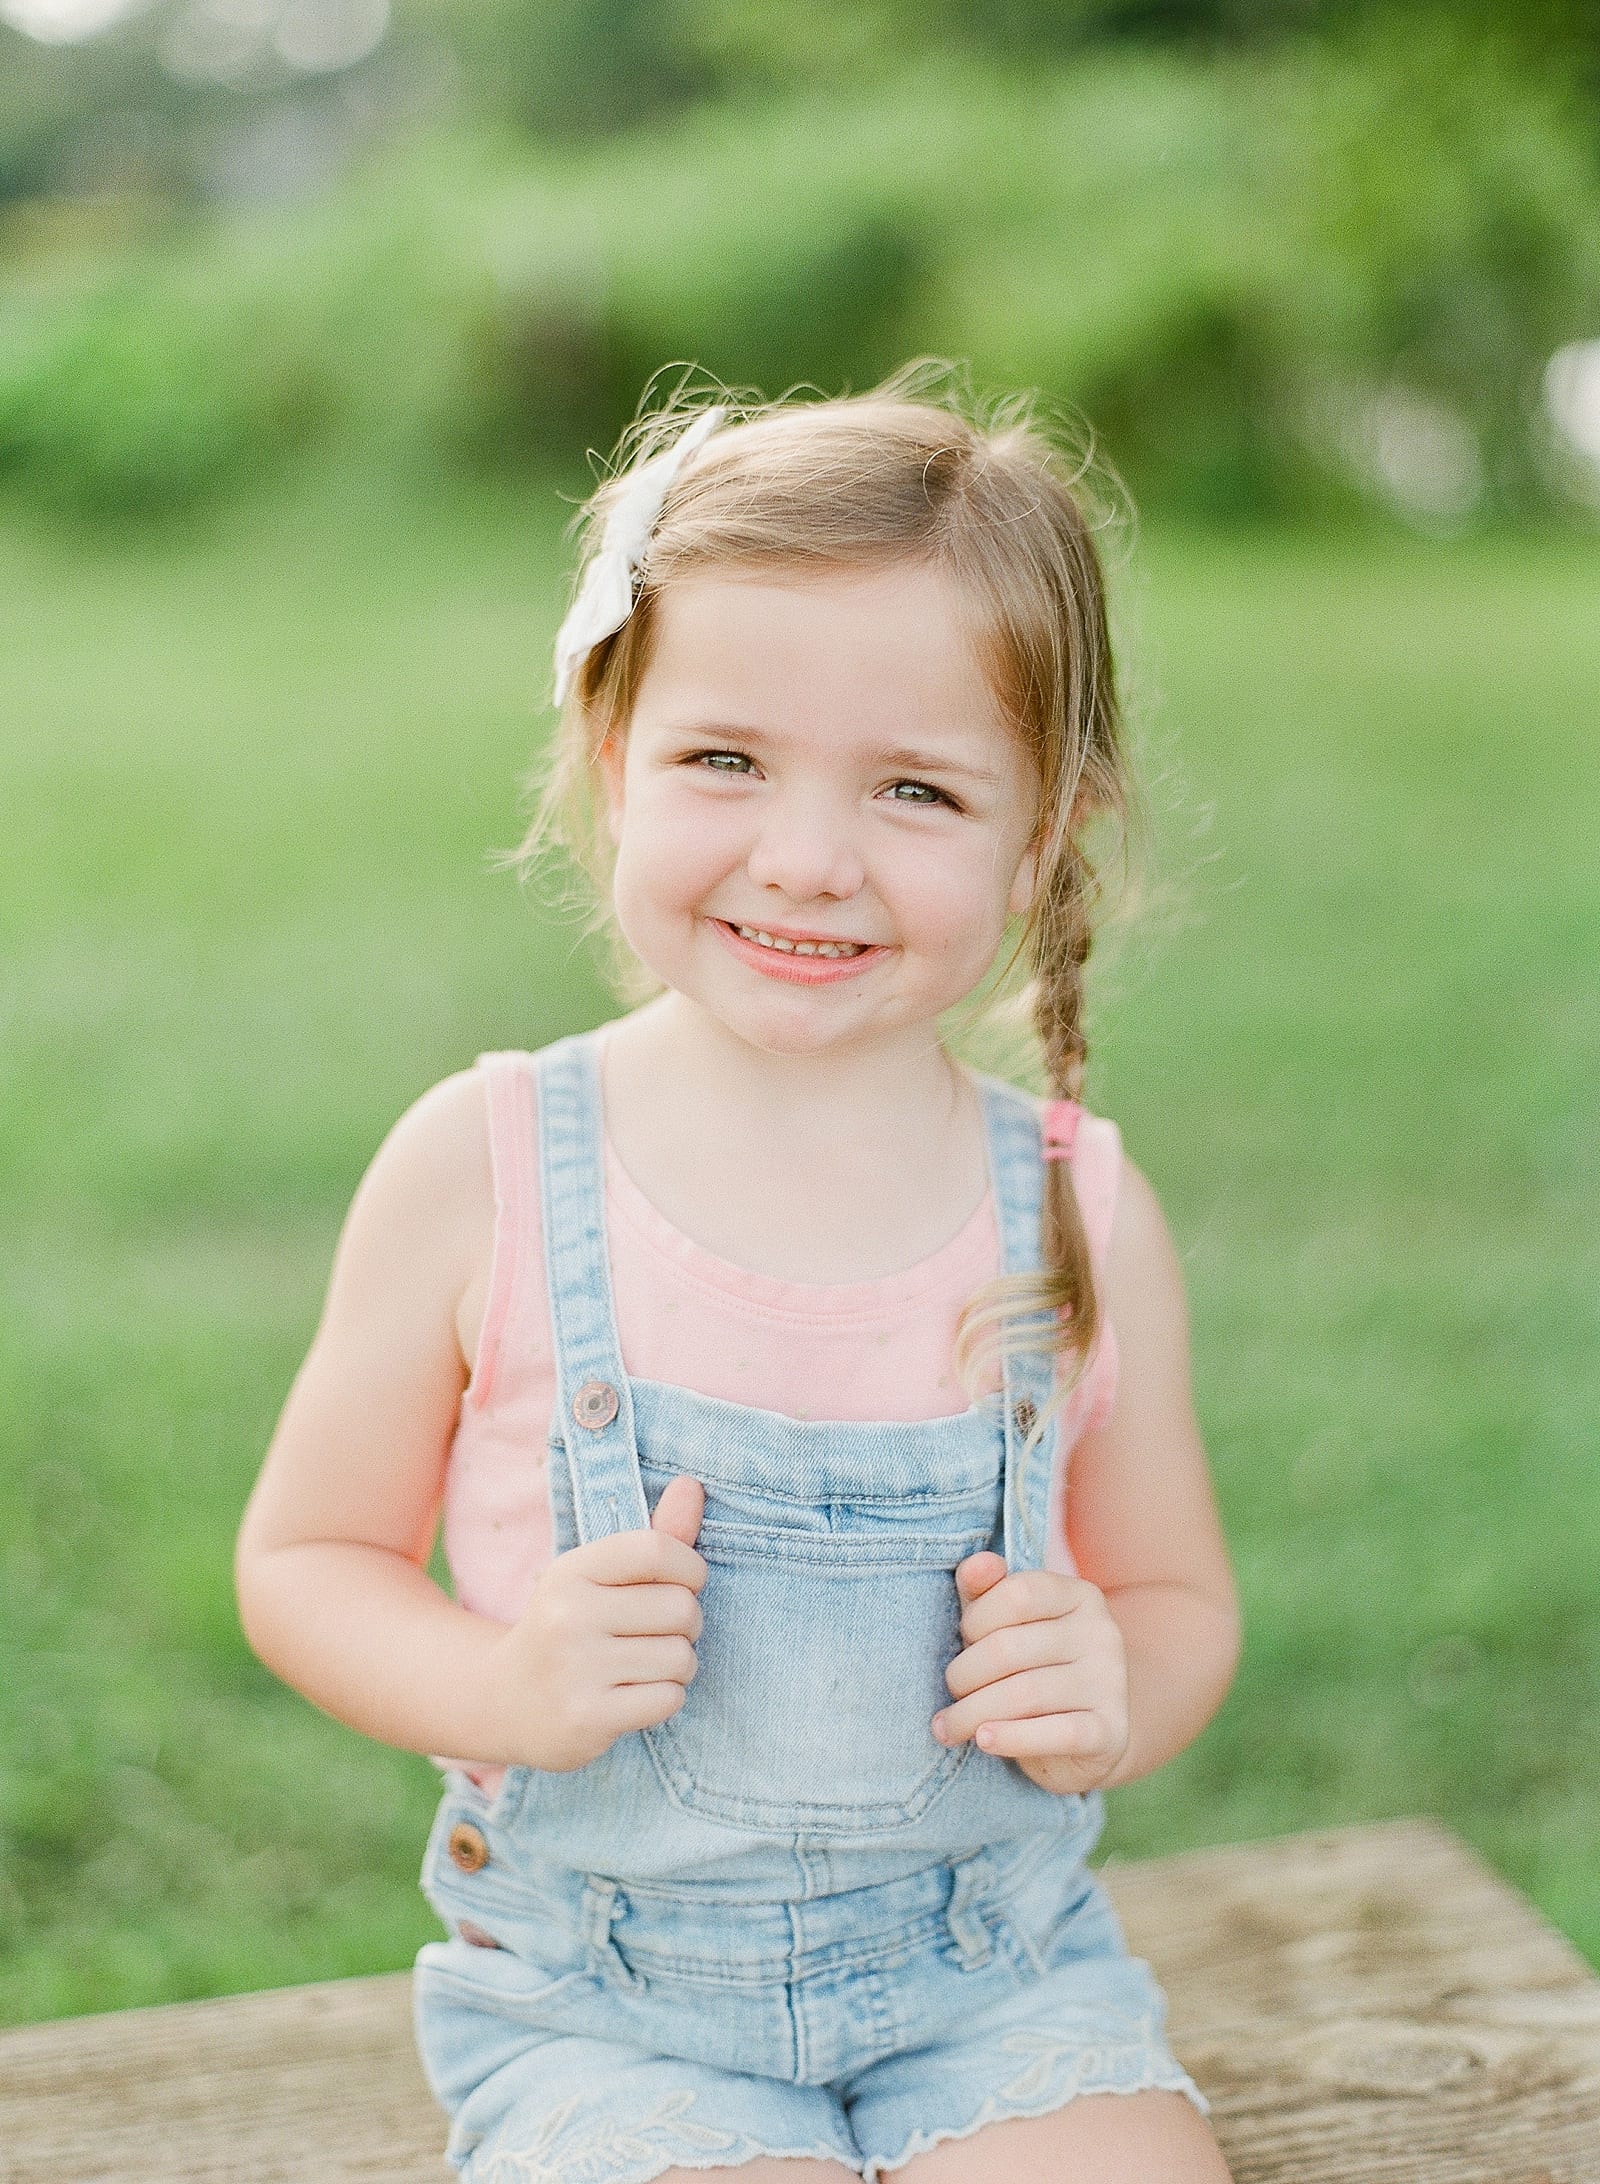 Photographing Children Little Girl Smiling in Overalls Photo